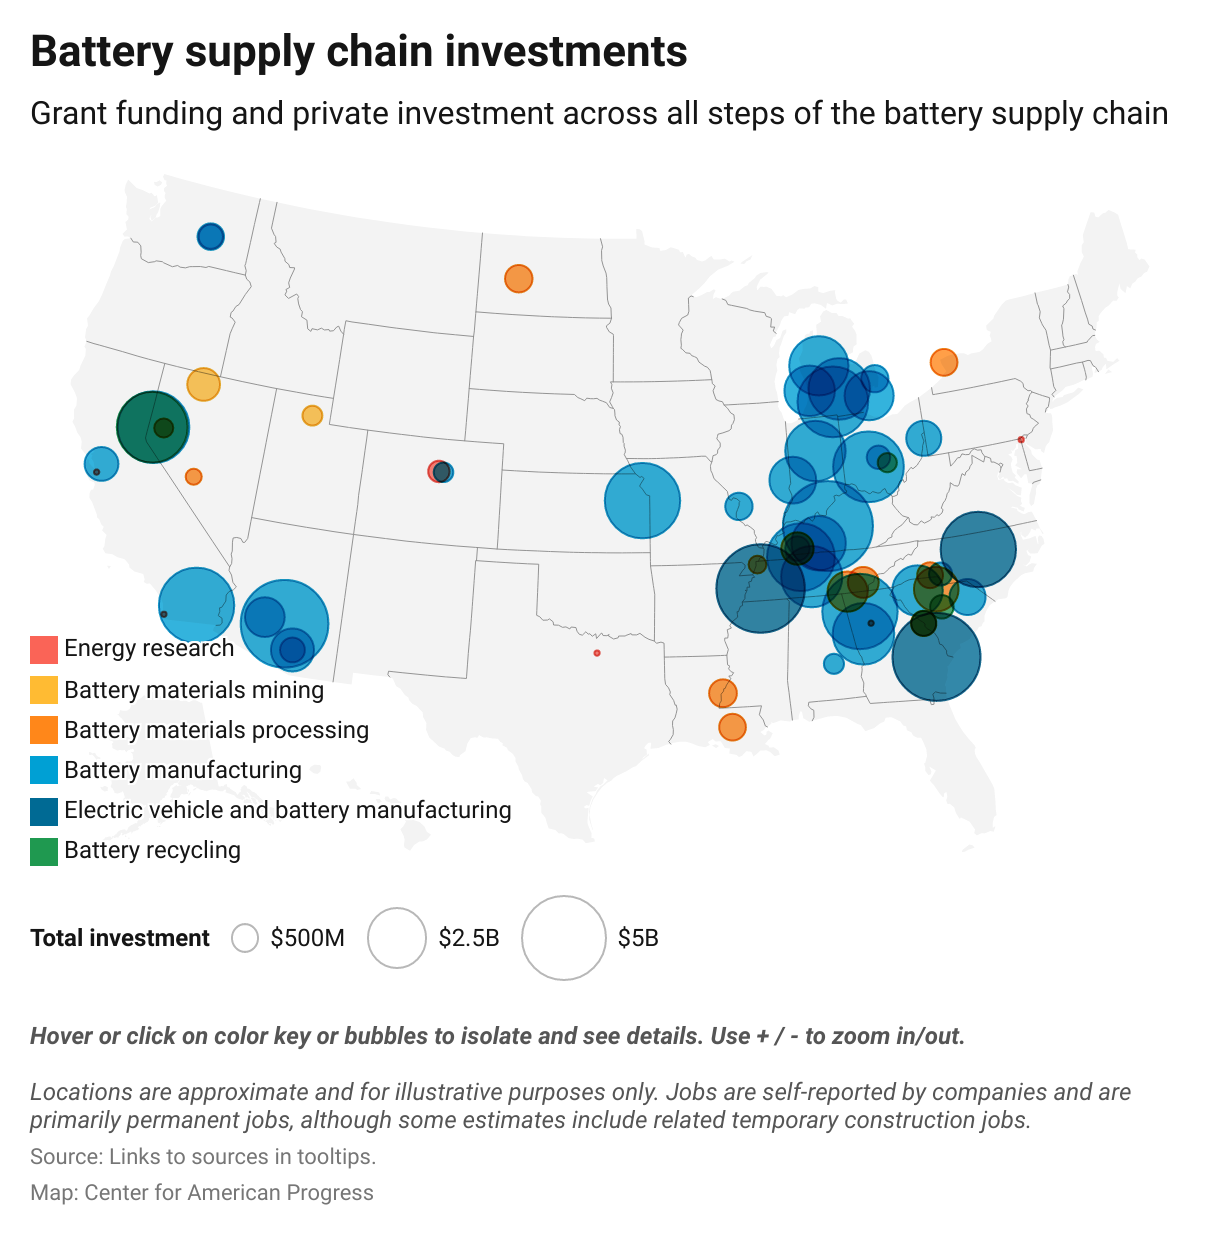 A map of the United States with dots representing the location and size of the announced investment; dots are color coded to represent the different stages of battery manufacturing: research, mining, materials processing, manufacturing, and recycling.